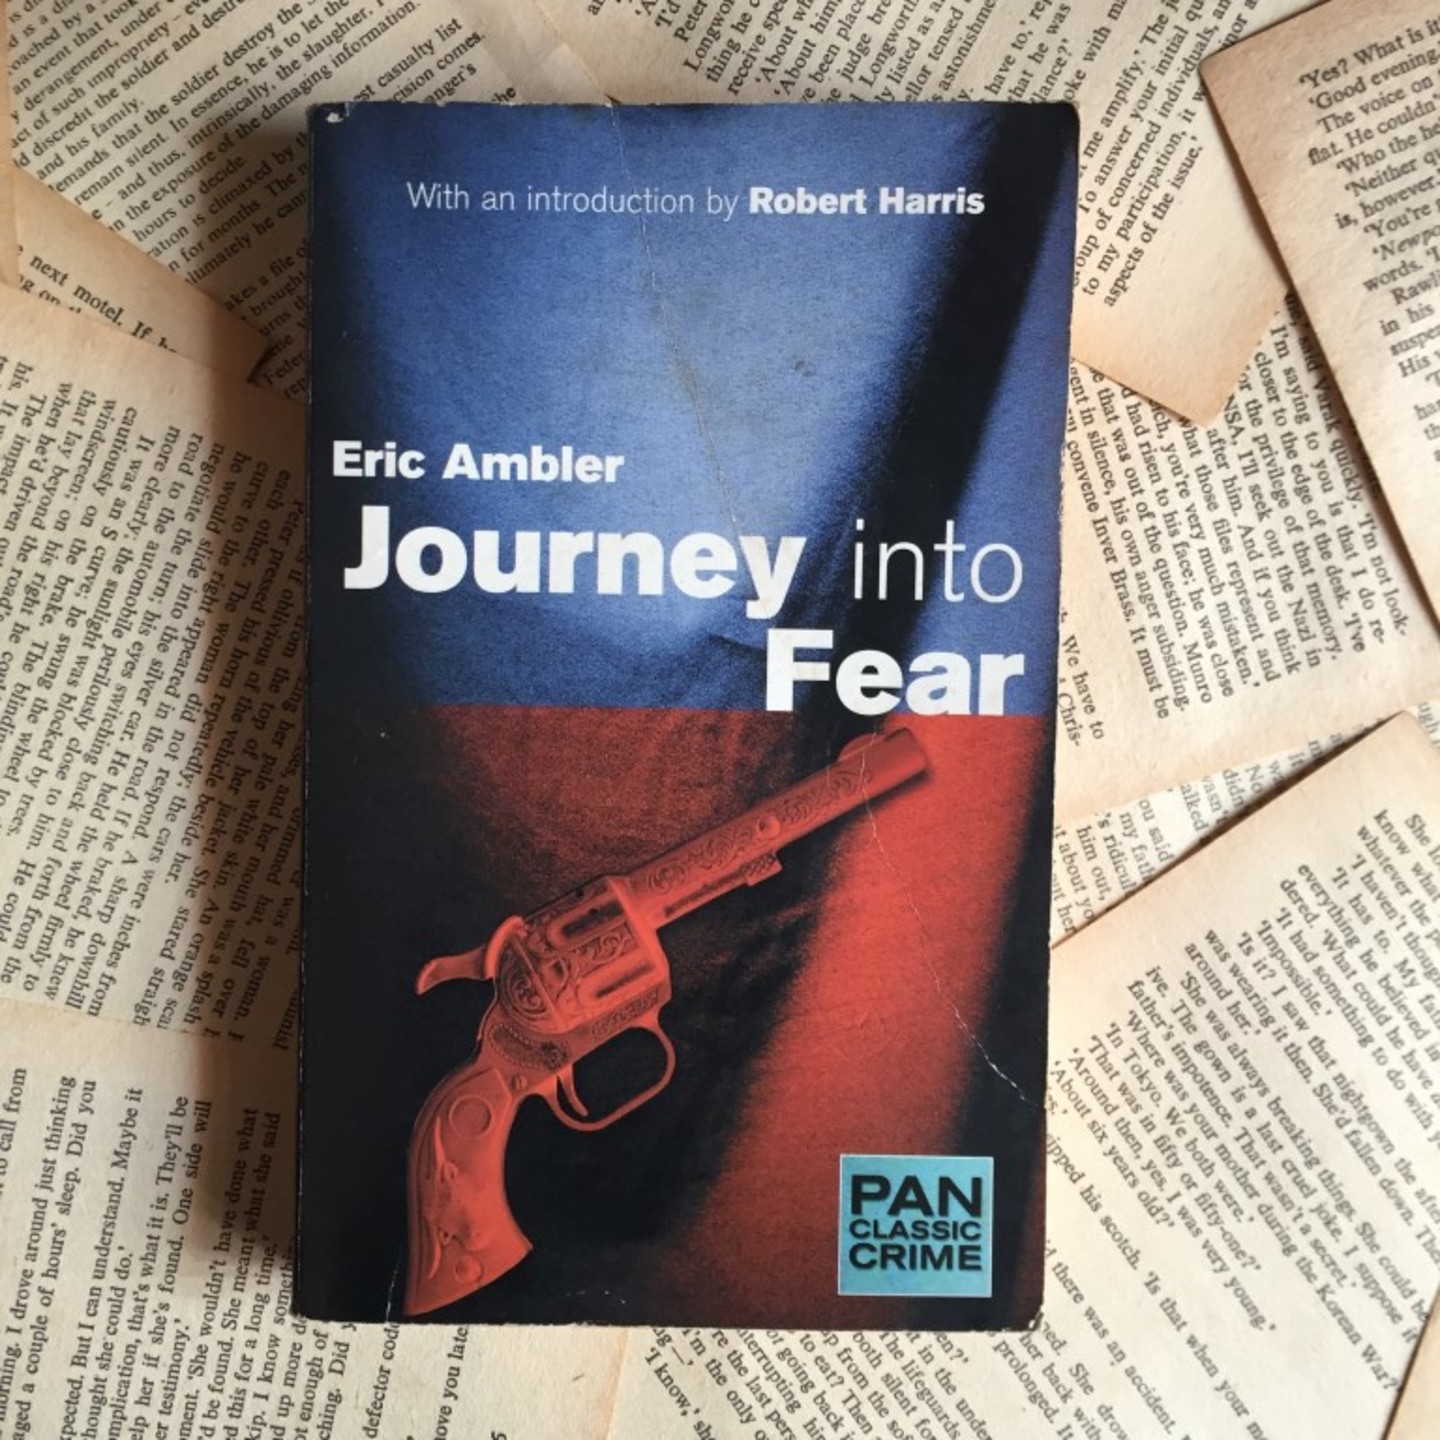 Journey into Fear by Eric Ambler [Paperback]